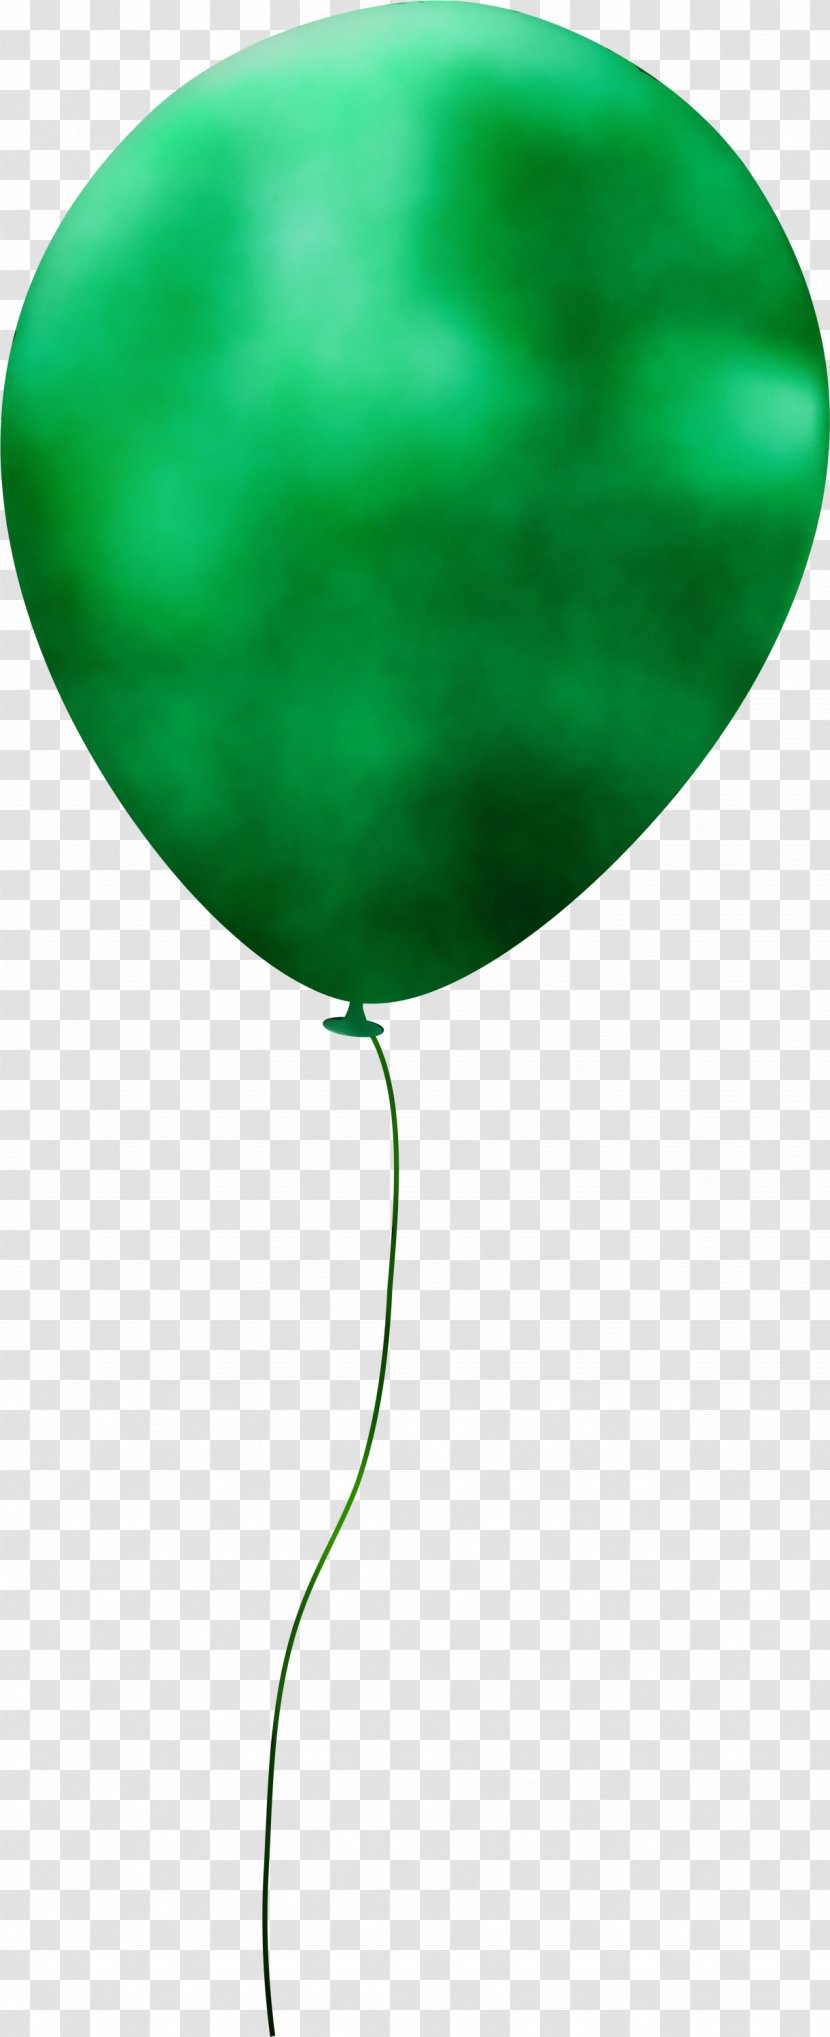 Green Leaf Watercolor - Balloon - Party Supply Plant Stem Transparent PNG